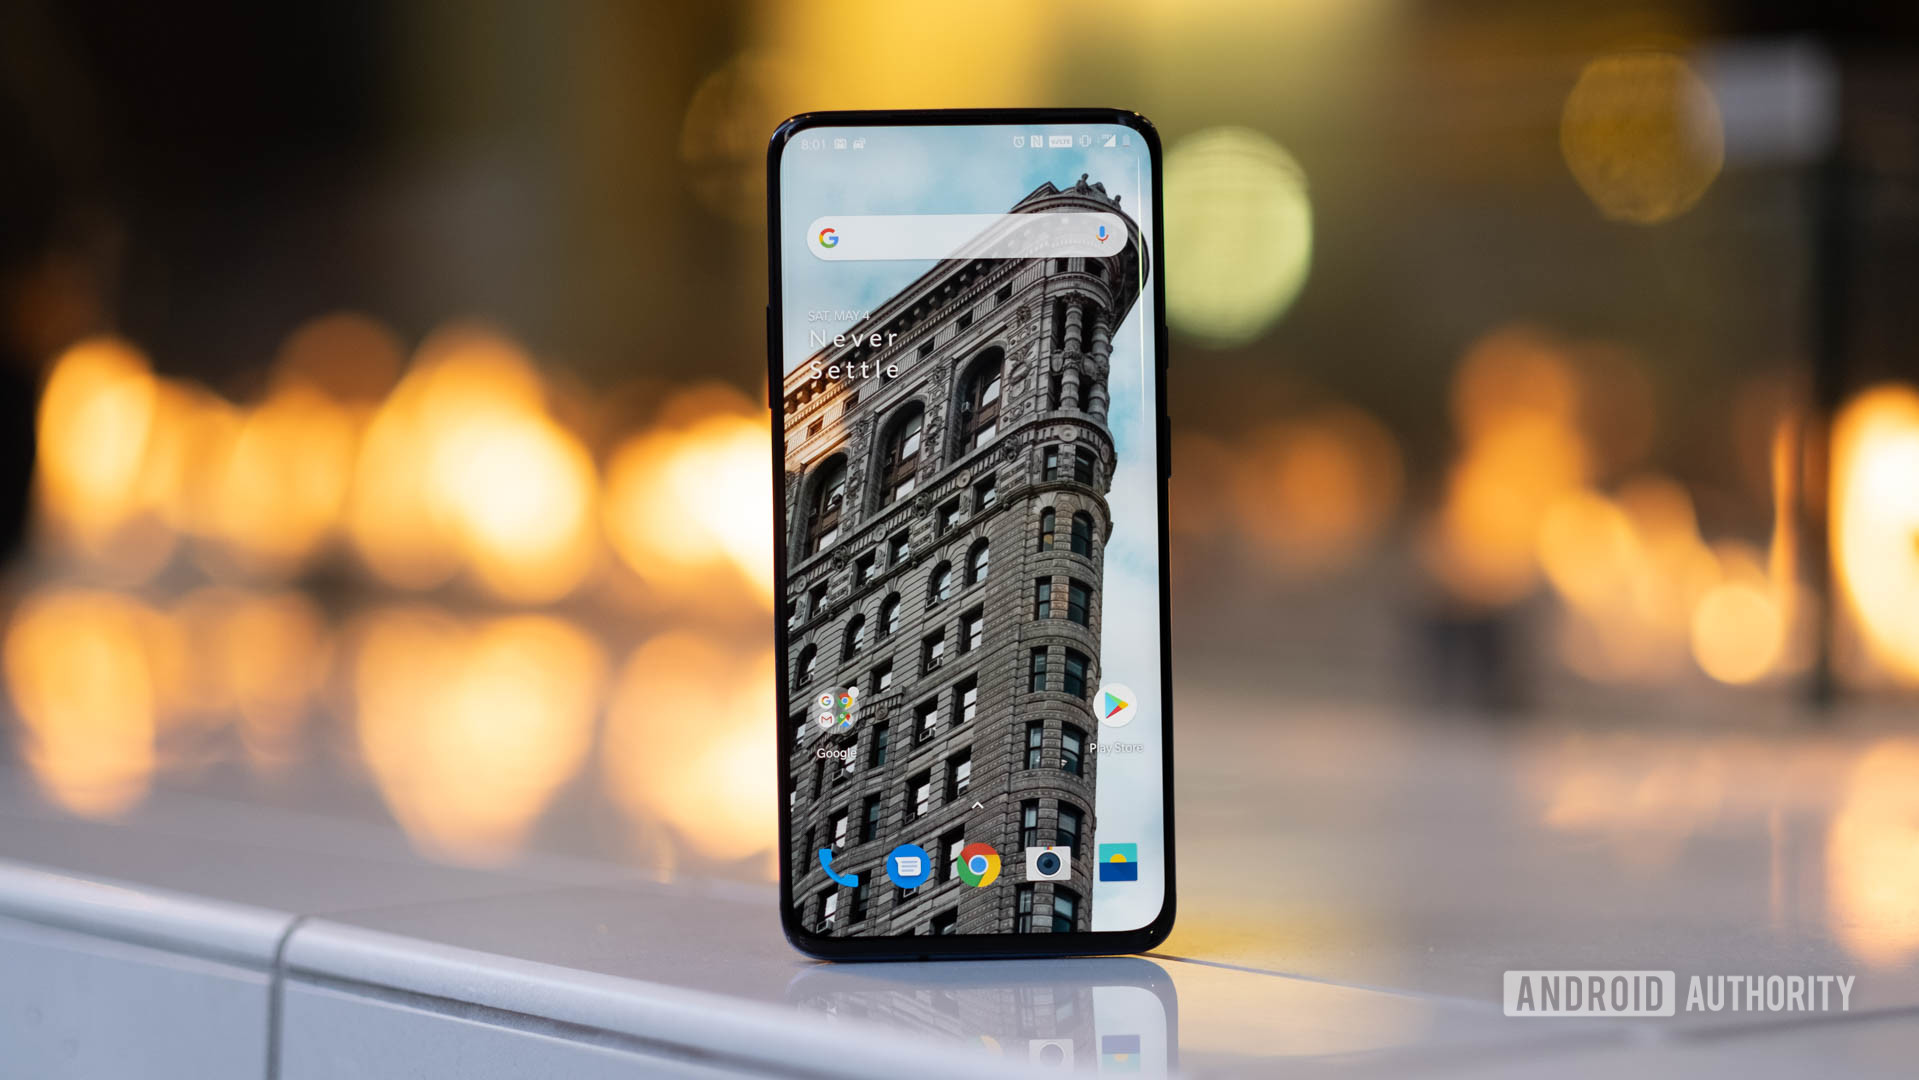 OnePlus 7 Pro screen in front of the fire